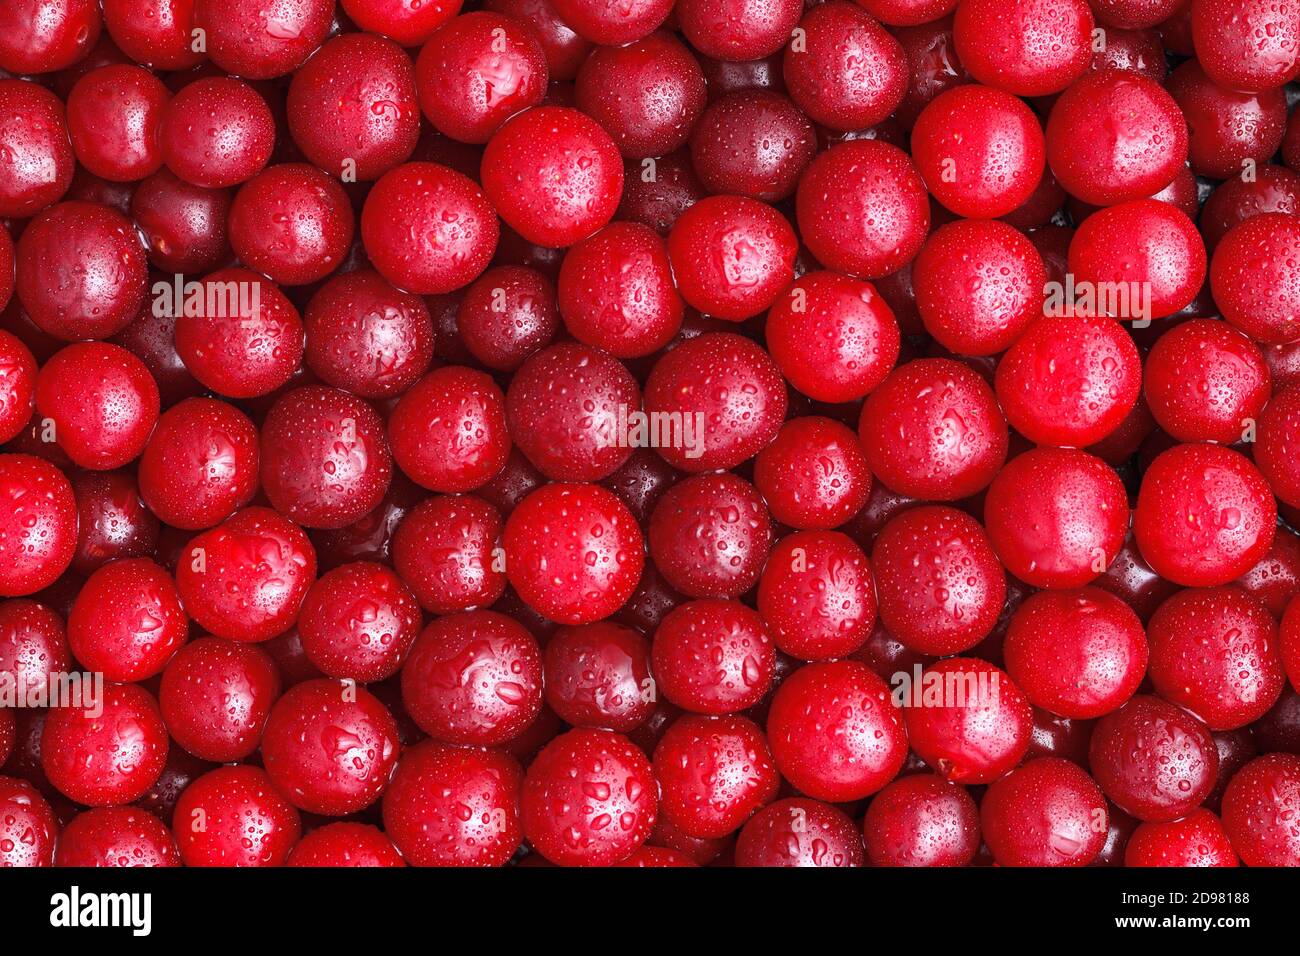 Food background. Top view of red cherries with water drops. Natural condition. Stock Photo